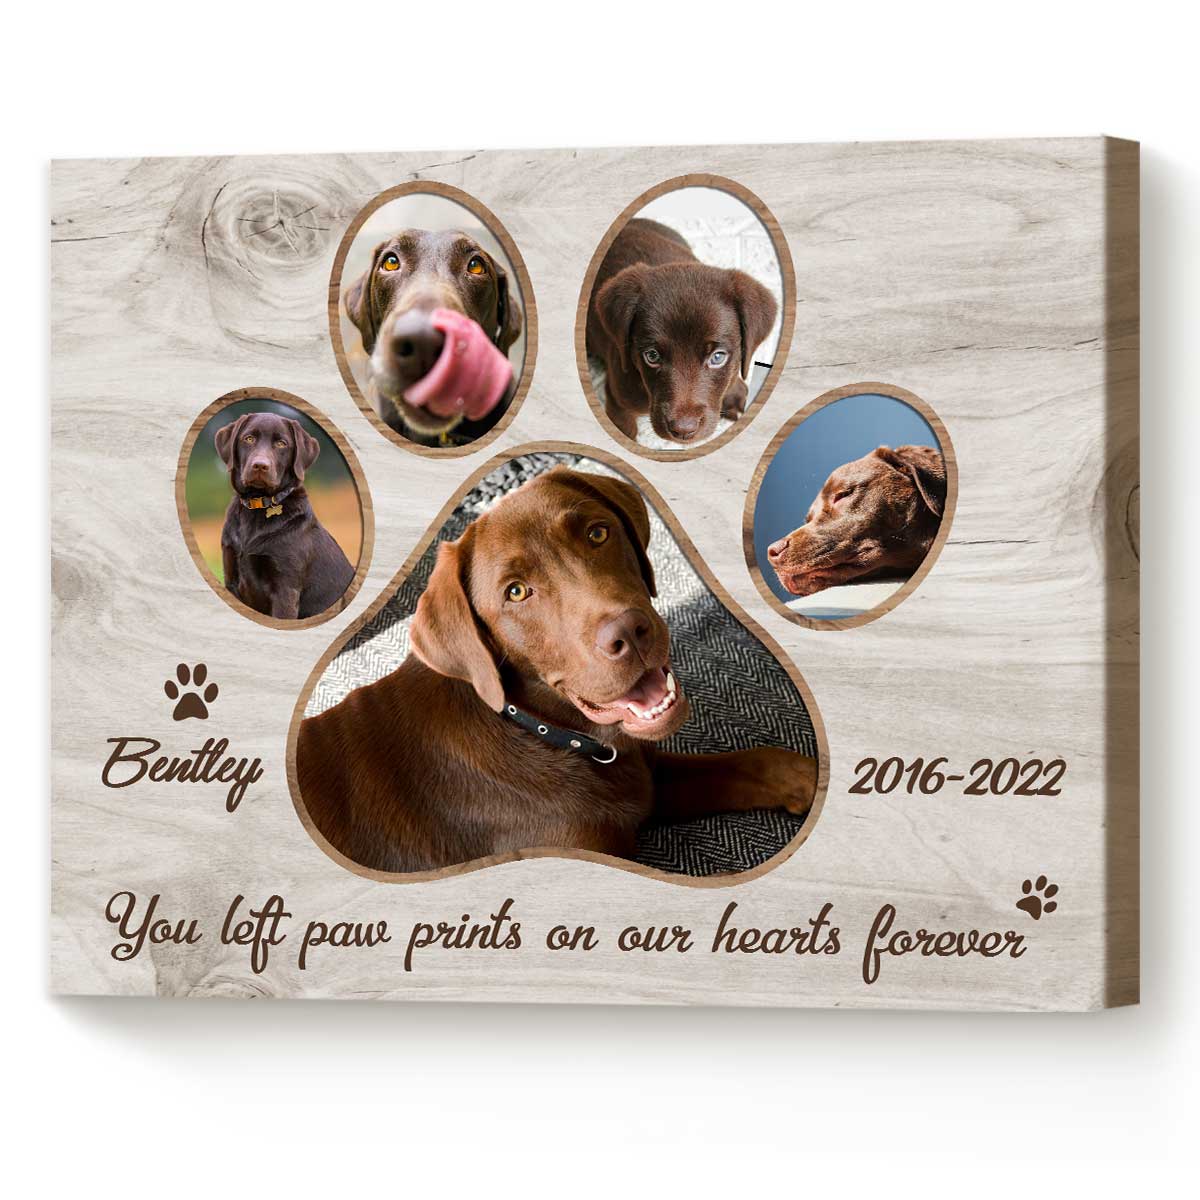 39 Paw-some Personalized Pet Gifts That Are Perfect For Pets And